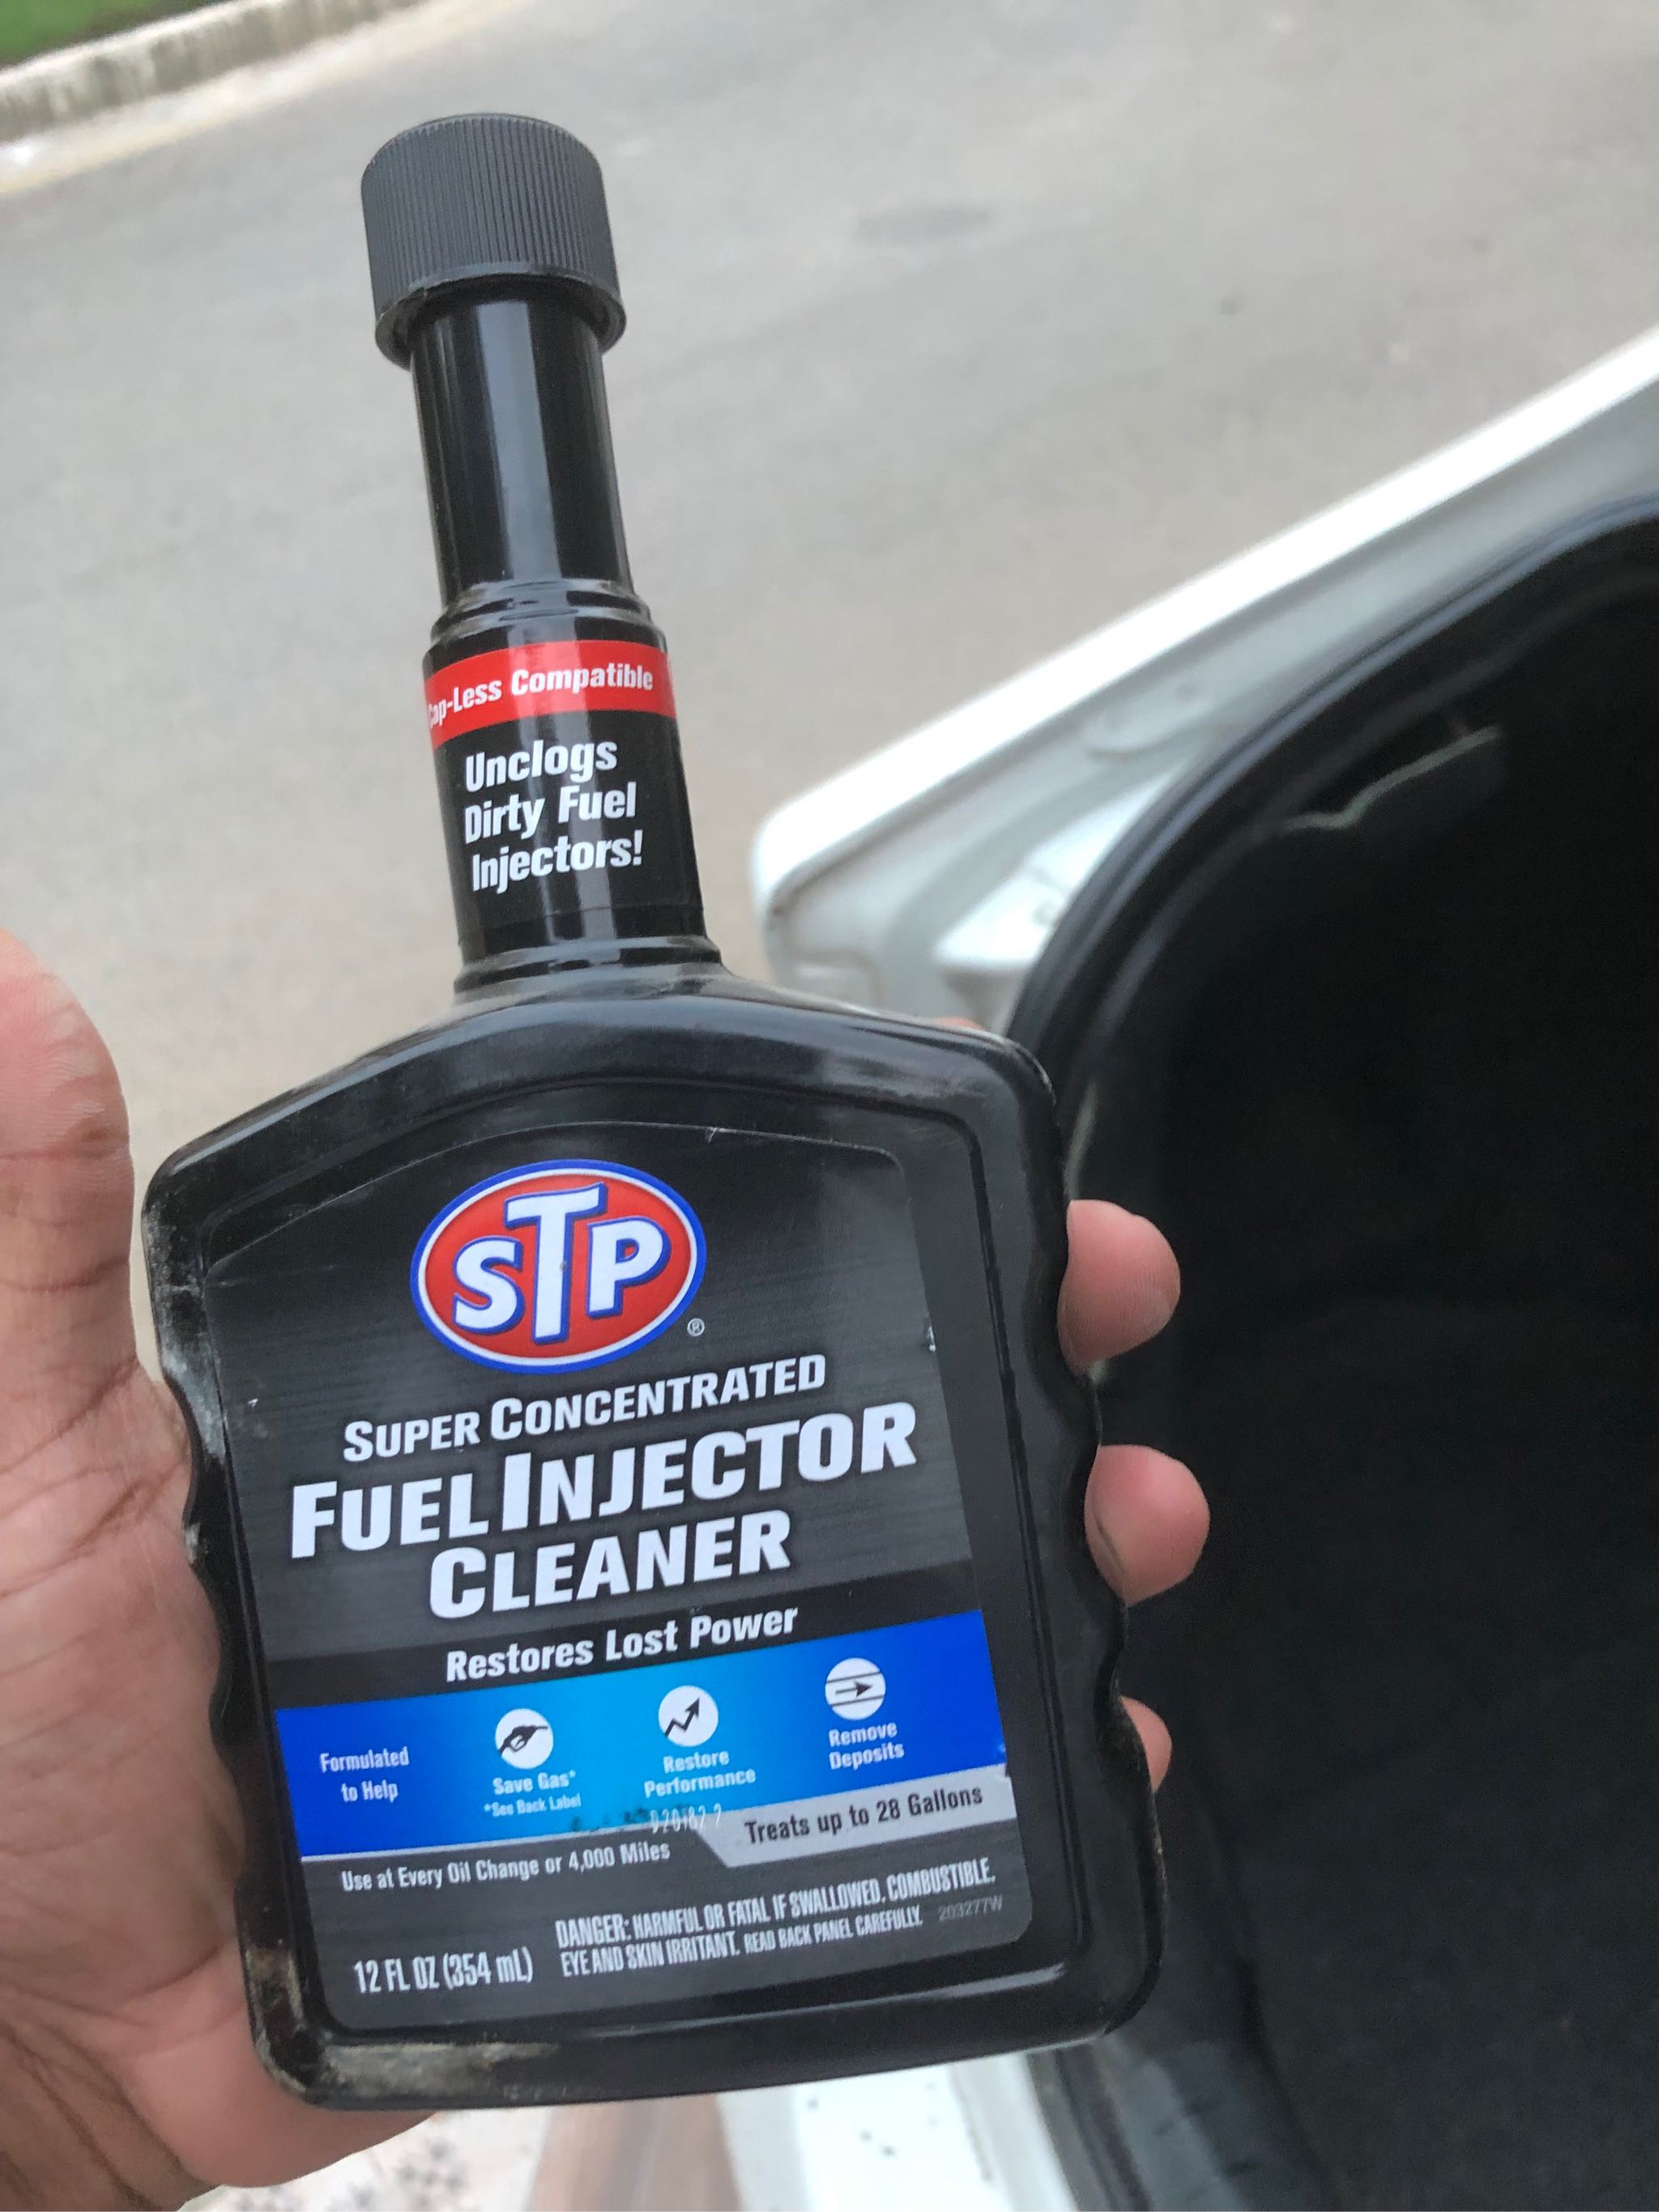 STP Super Concentrated Fuel Injector Cleaner - 12 FL OZ 